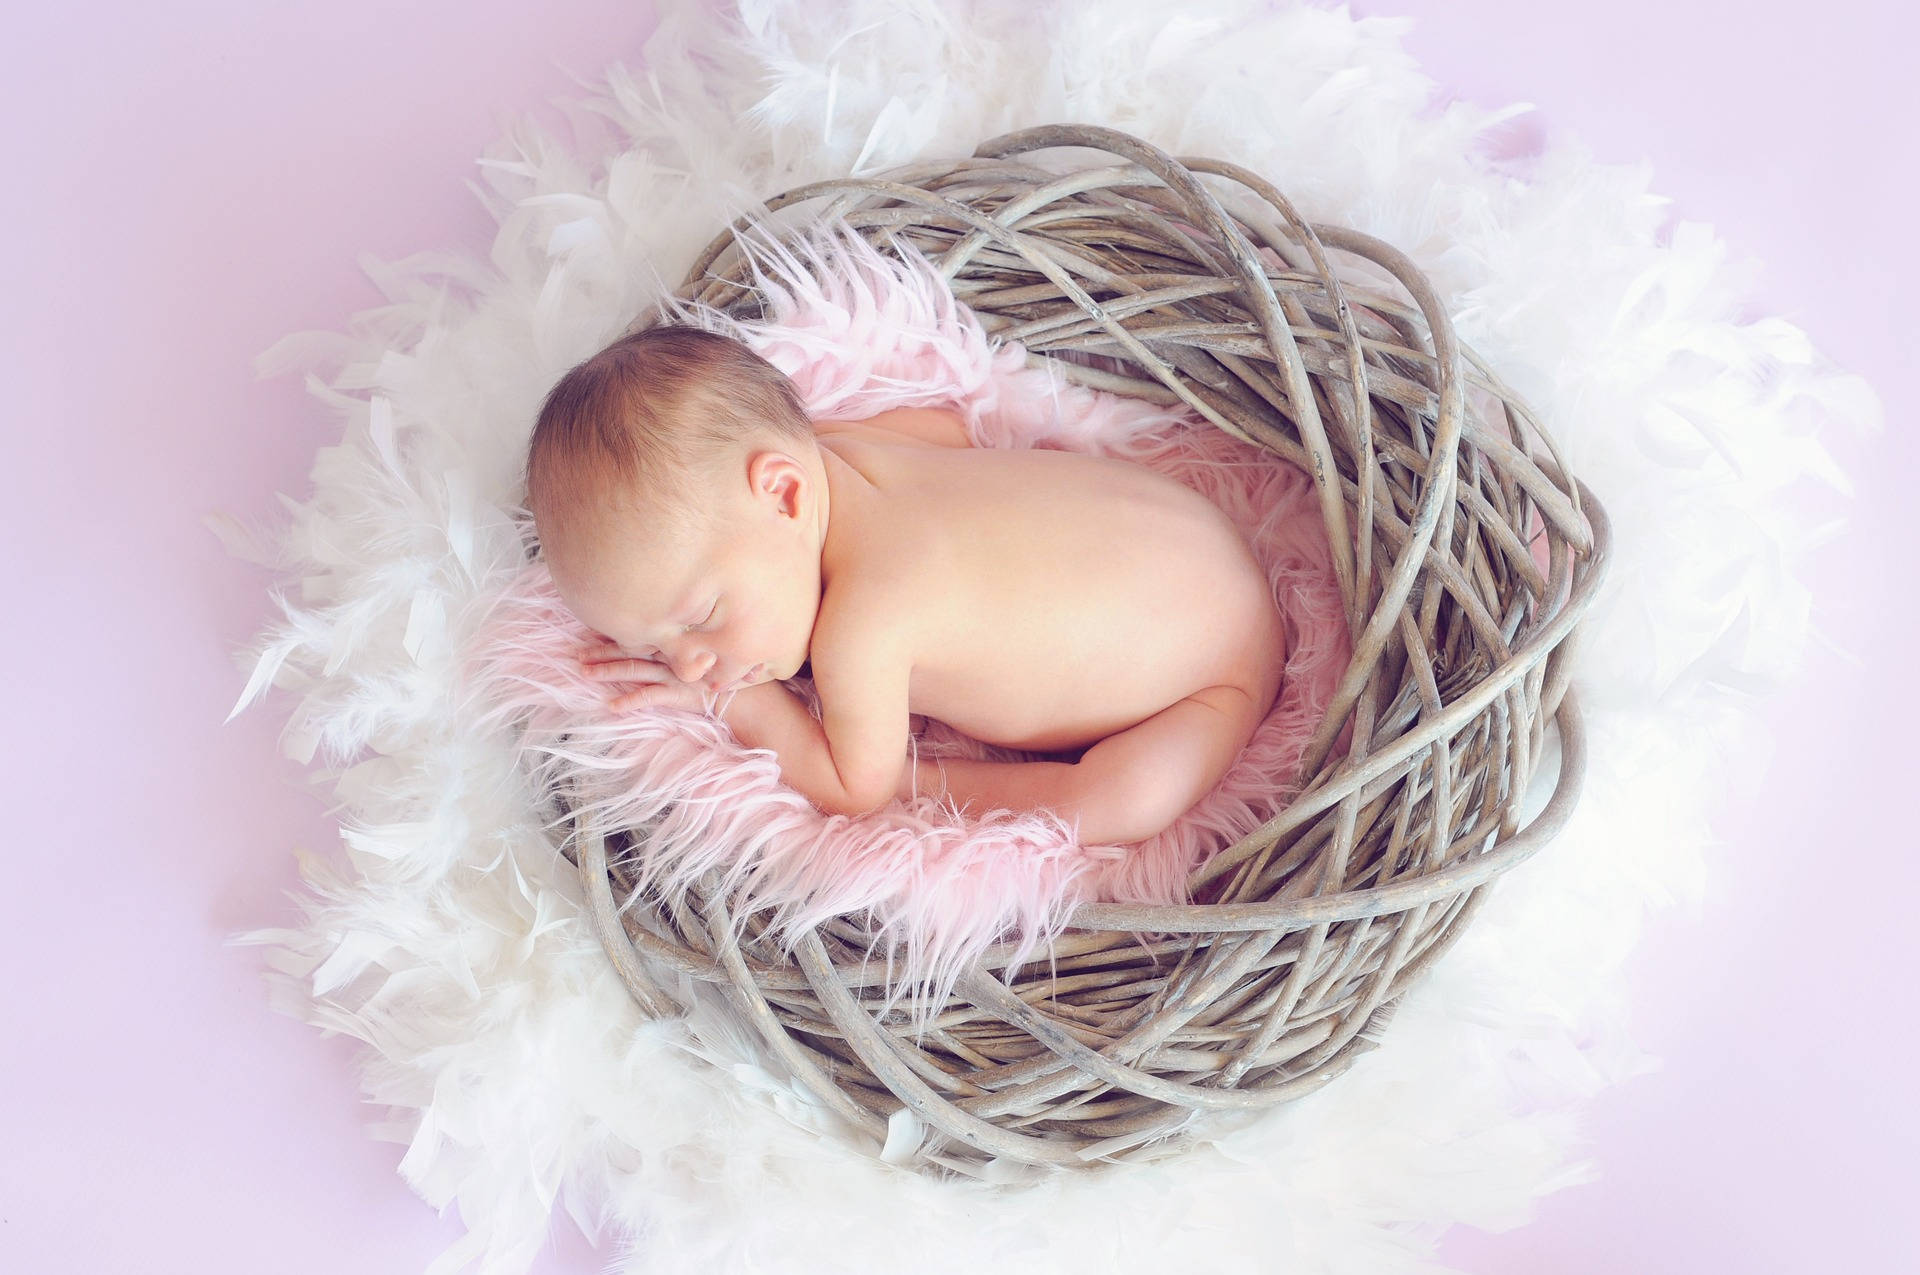 Very Cute Baby On Feathery Nest Background